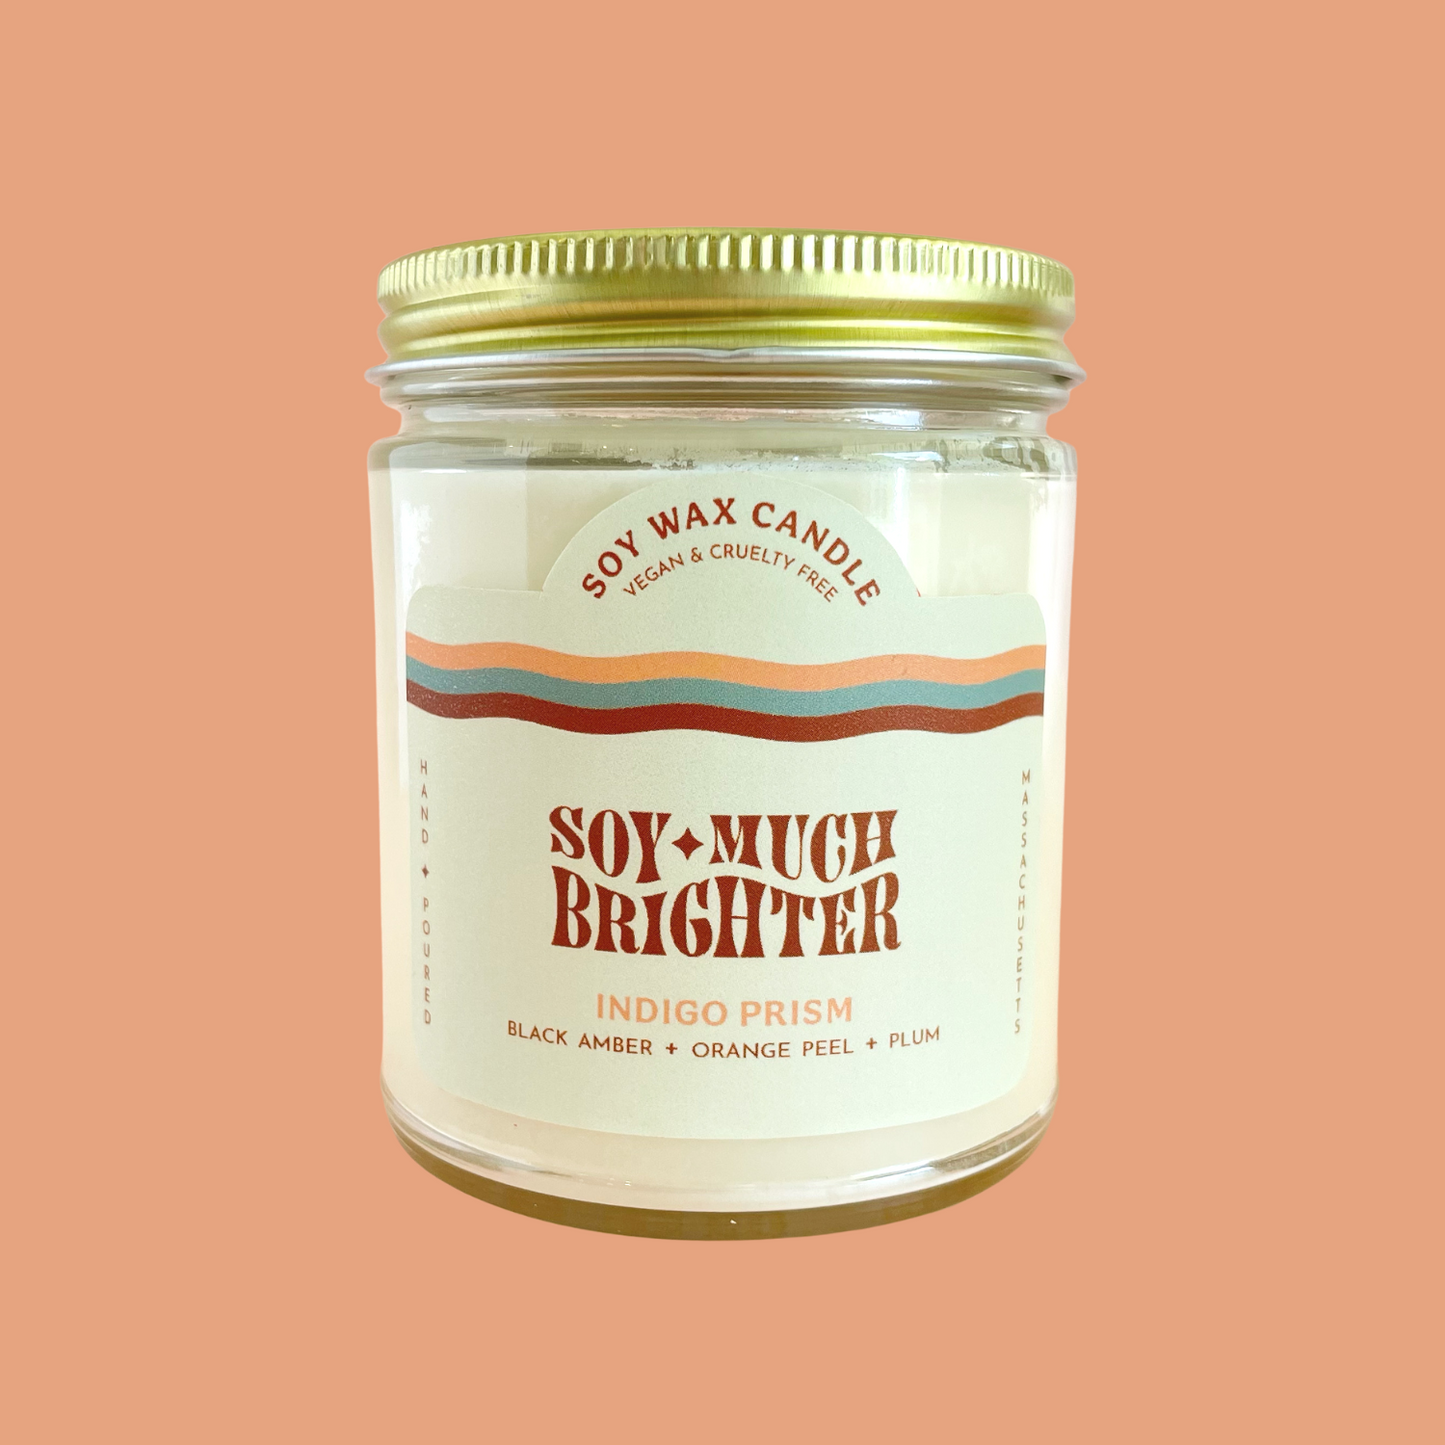 The best soy candles in Massachusetts including the indigo prism hand-poured candles by Soy Much Brighter